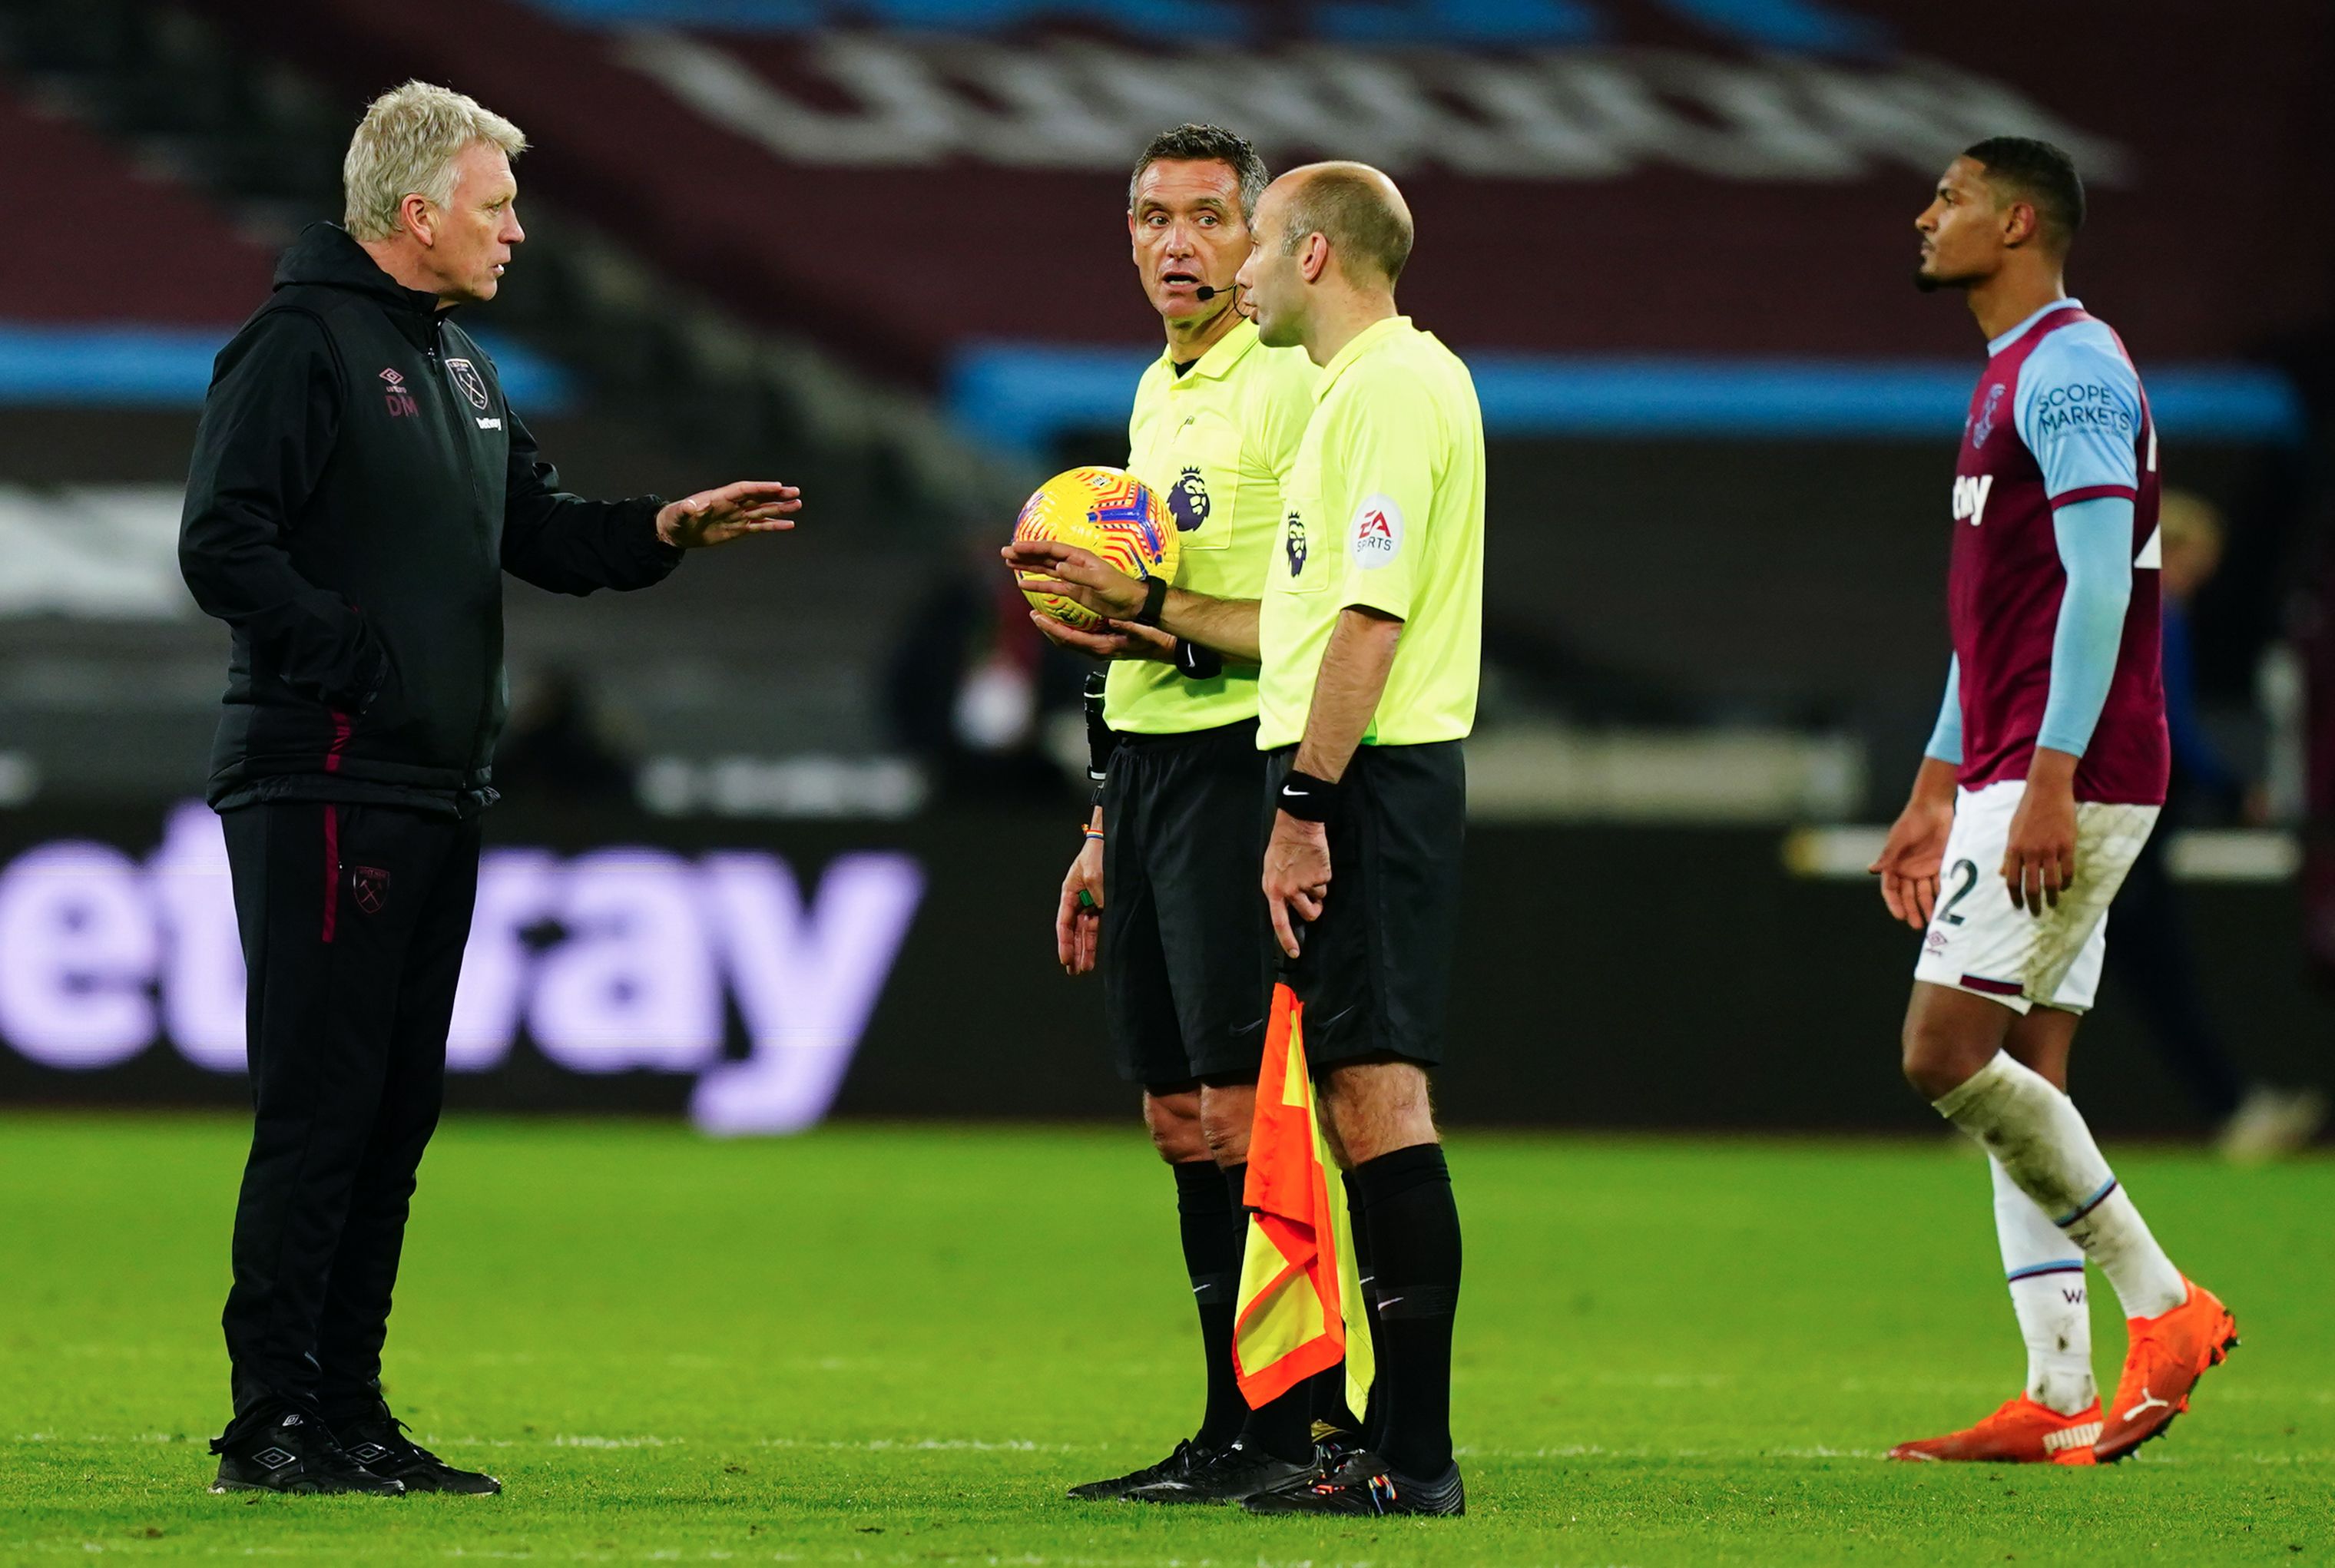 David Moyes speaks to the officials after the full-time whistle